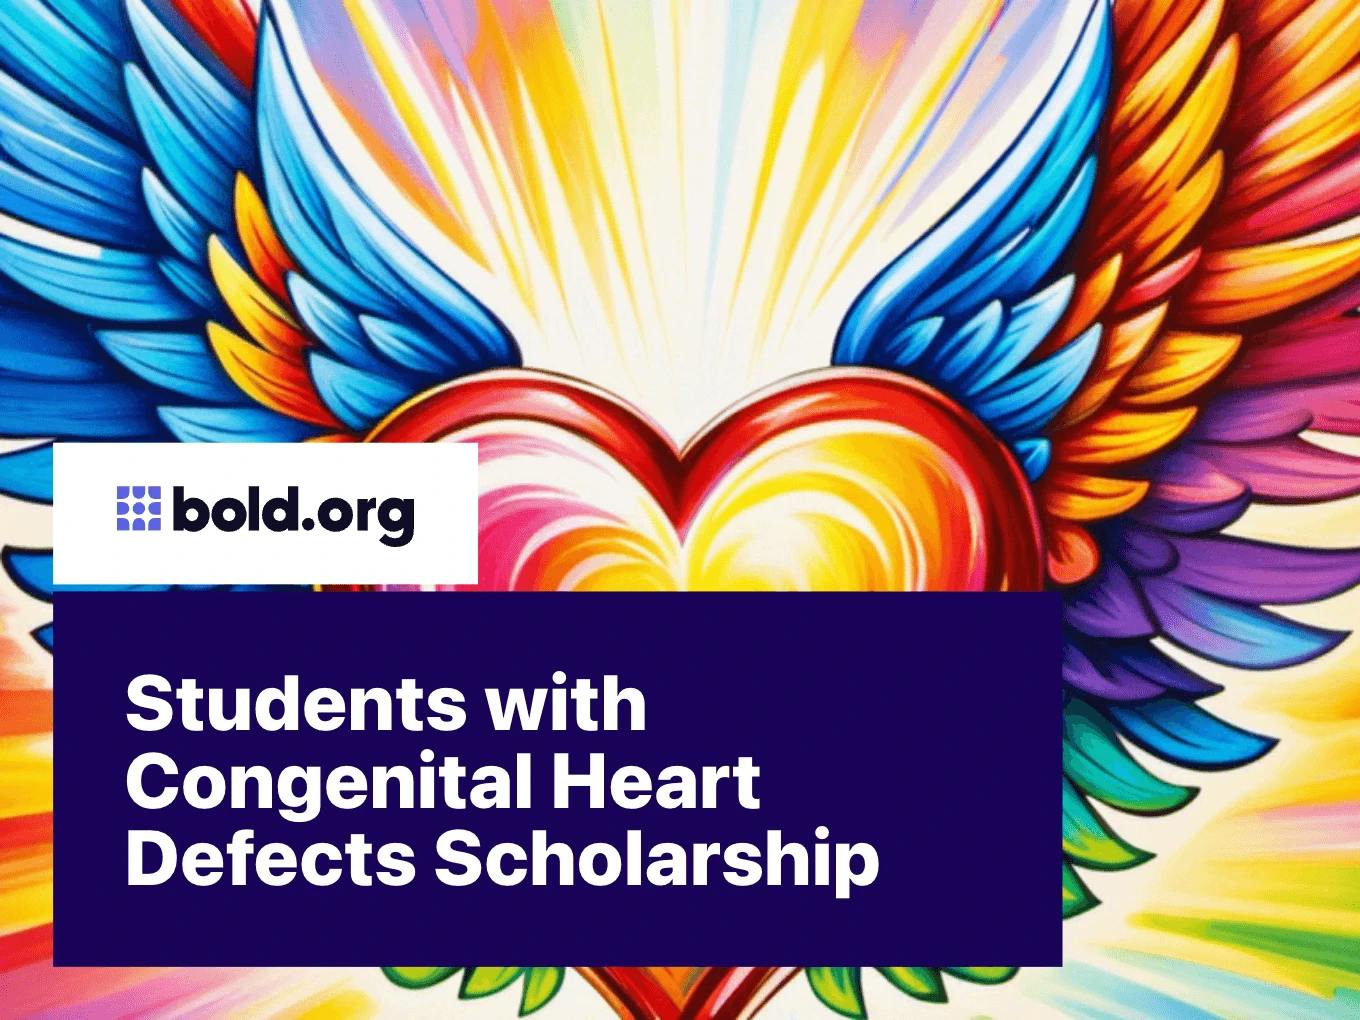 Students with Congenital Heart Defects Scholarship